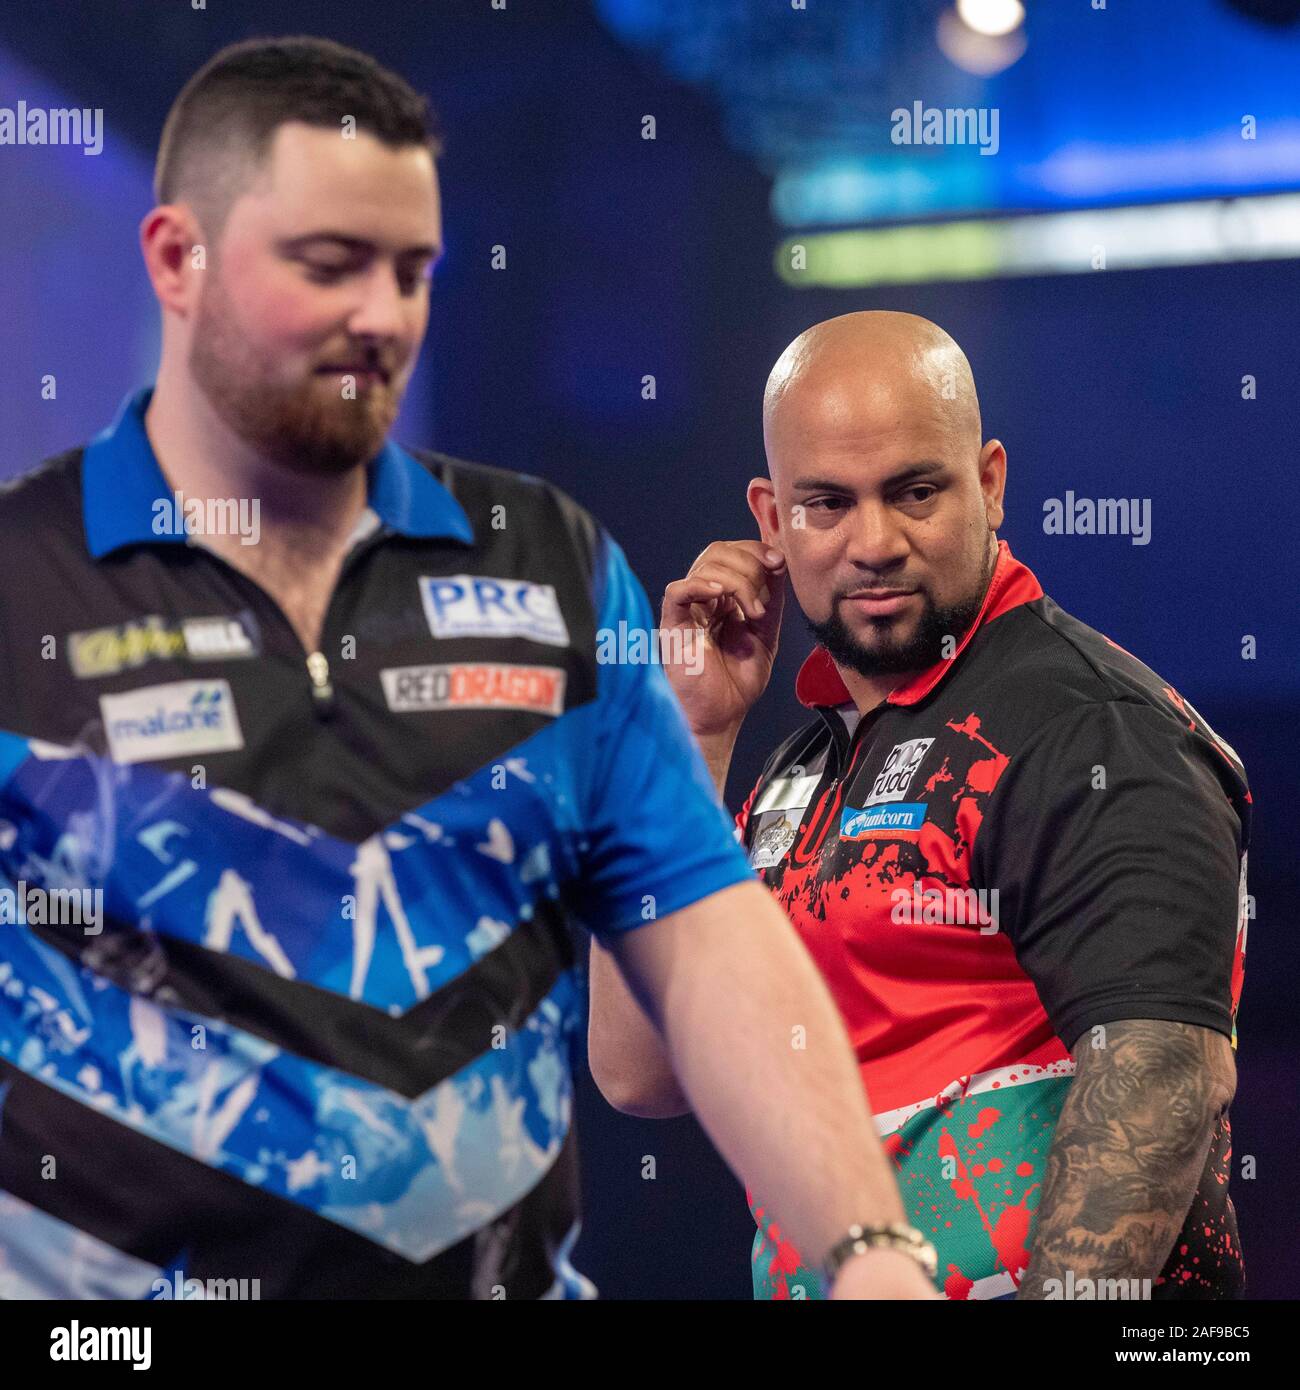 Londen, UK. 13th Dec, 2019. LONDEN, 13-12-2019, Darts player Devon Peterson  and Darts player Luke Humphries during the William Hill, World Championship  Darts, PDC. Credit: Pro Shots/Alamy Live News Stock Photo - Alamy